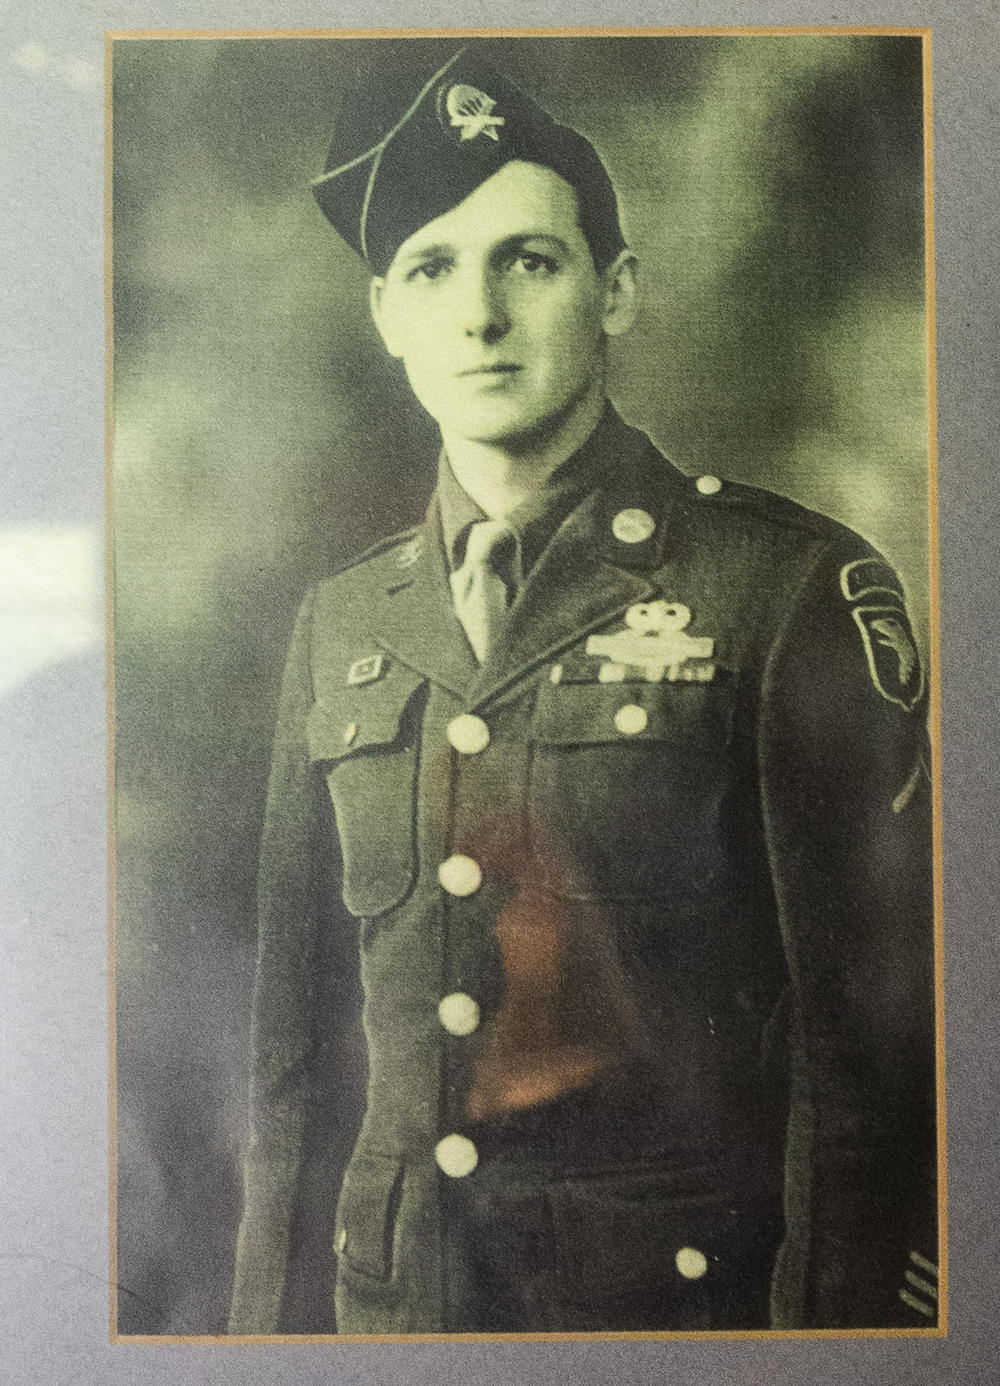 James "Pee Wee" Martin is shown in military uniform as a young man.